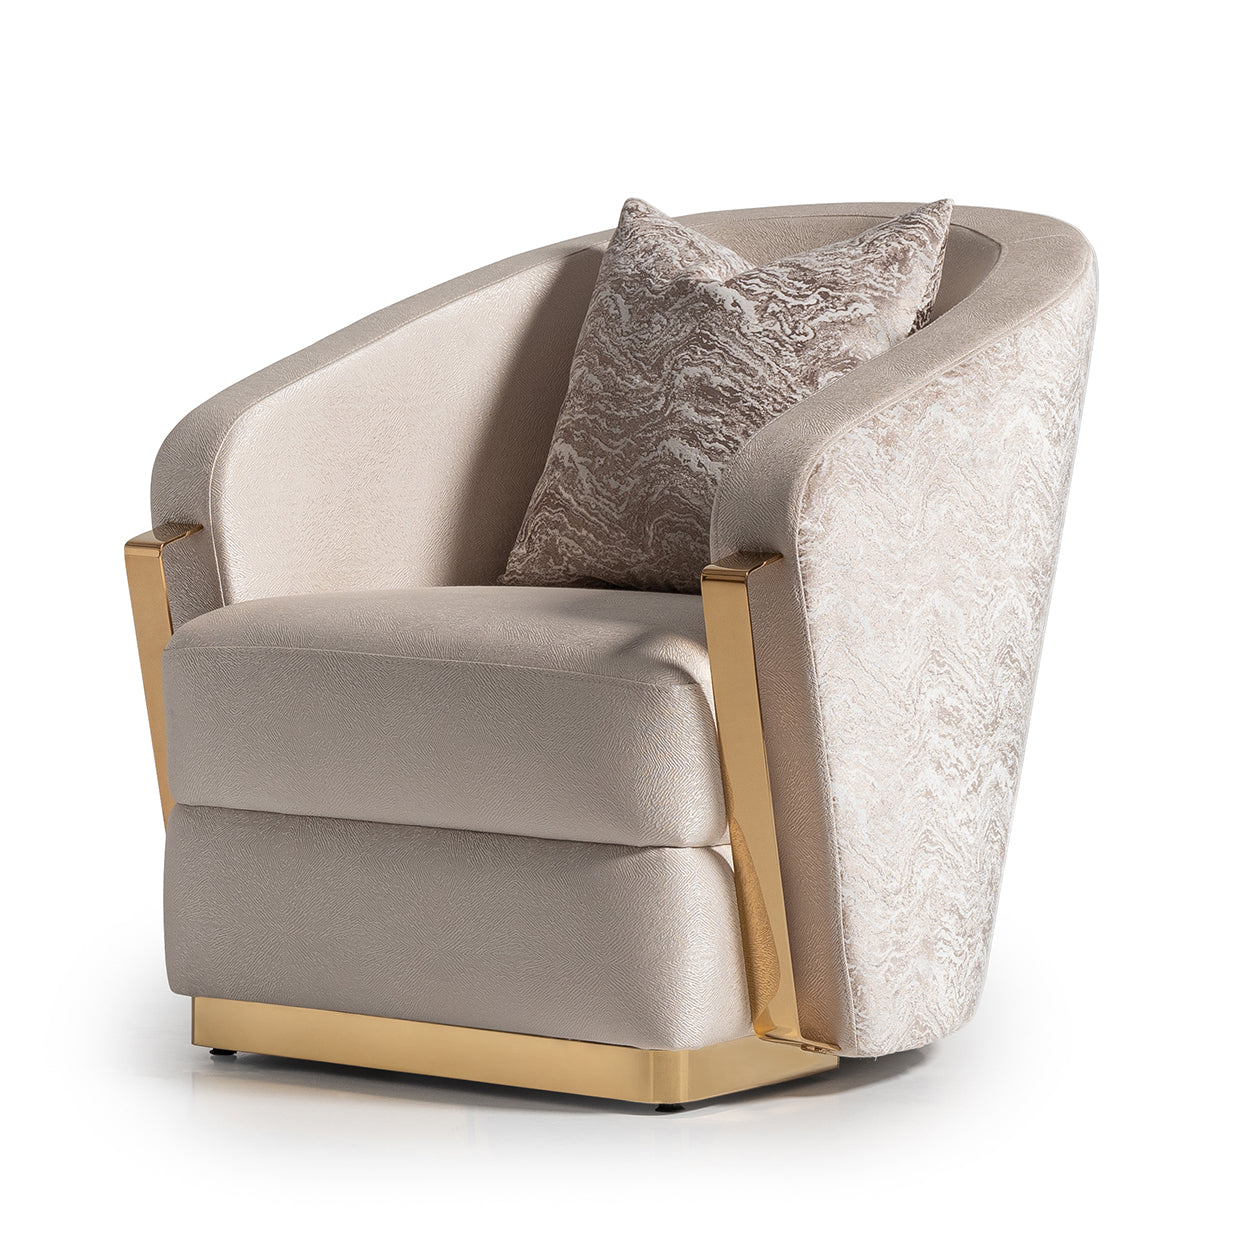 CARMELA, Chair Almond Gold, 1.	Refinement, Indulgence, Striking centerpiece, Jacquard fabric, Titanium gold, Metal band arms, Opulence, Stunning design, Marble look velvet, Timeless grandeur, Luxury, Marble pattern, Accent pillow, Artistry